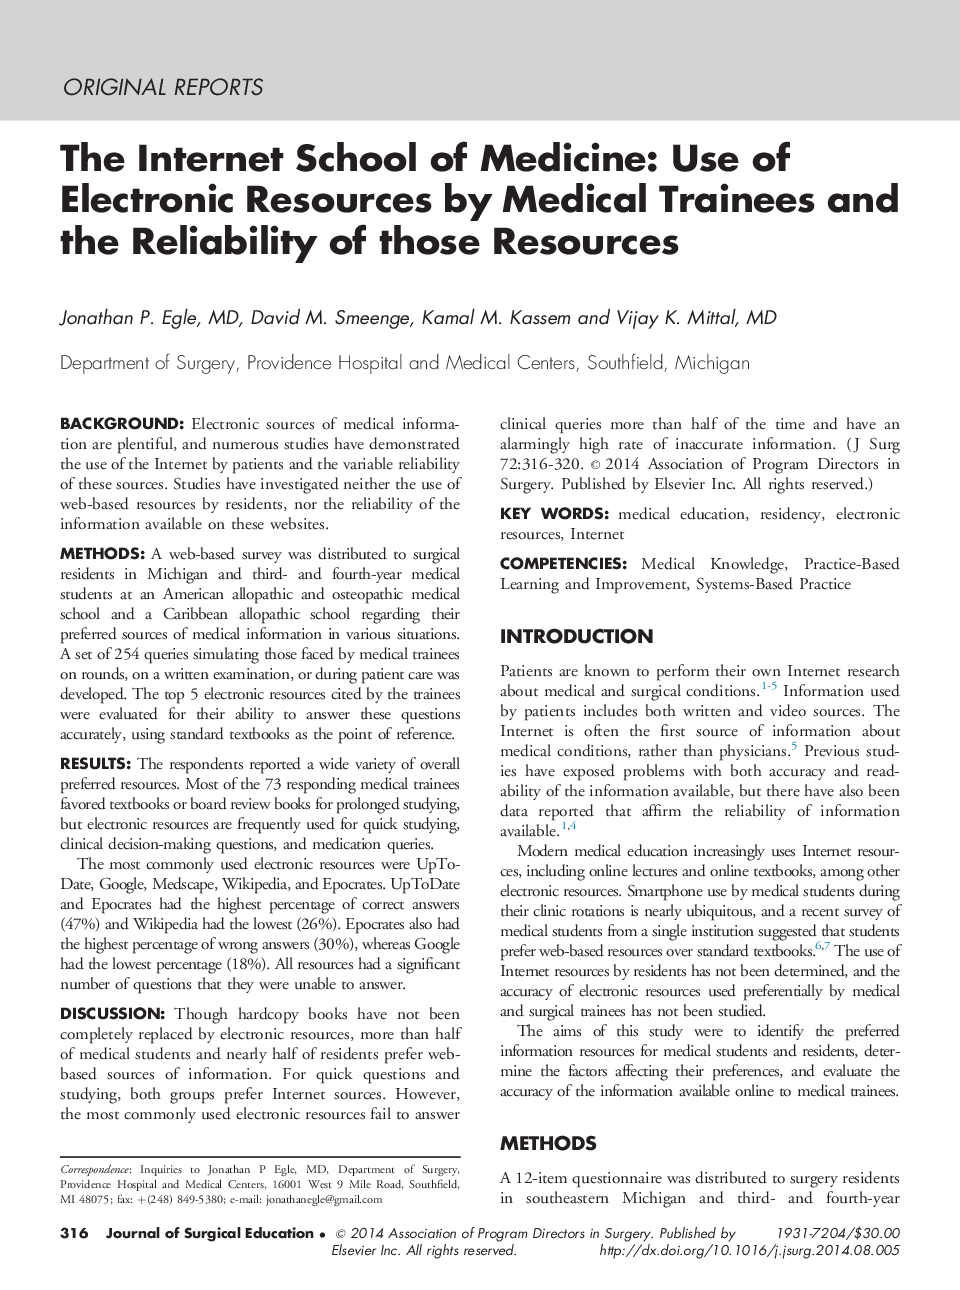 The Internet School of Medicine: Use of Electronic Resources by Medical Trainees and the Reliability of those Resources